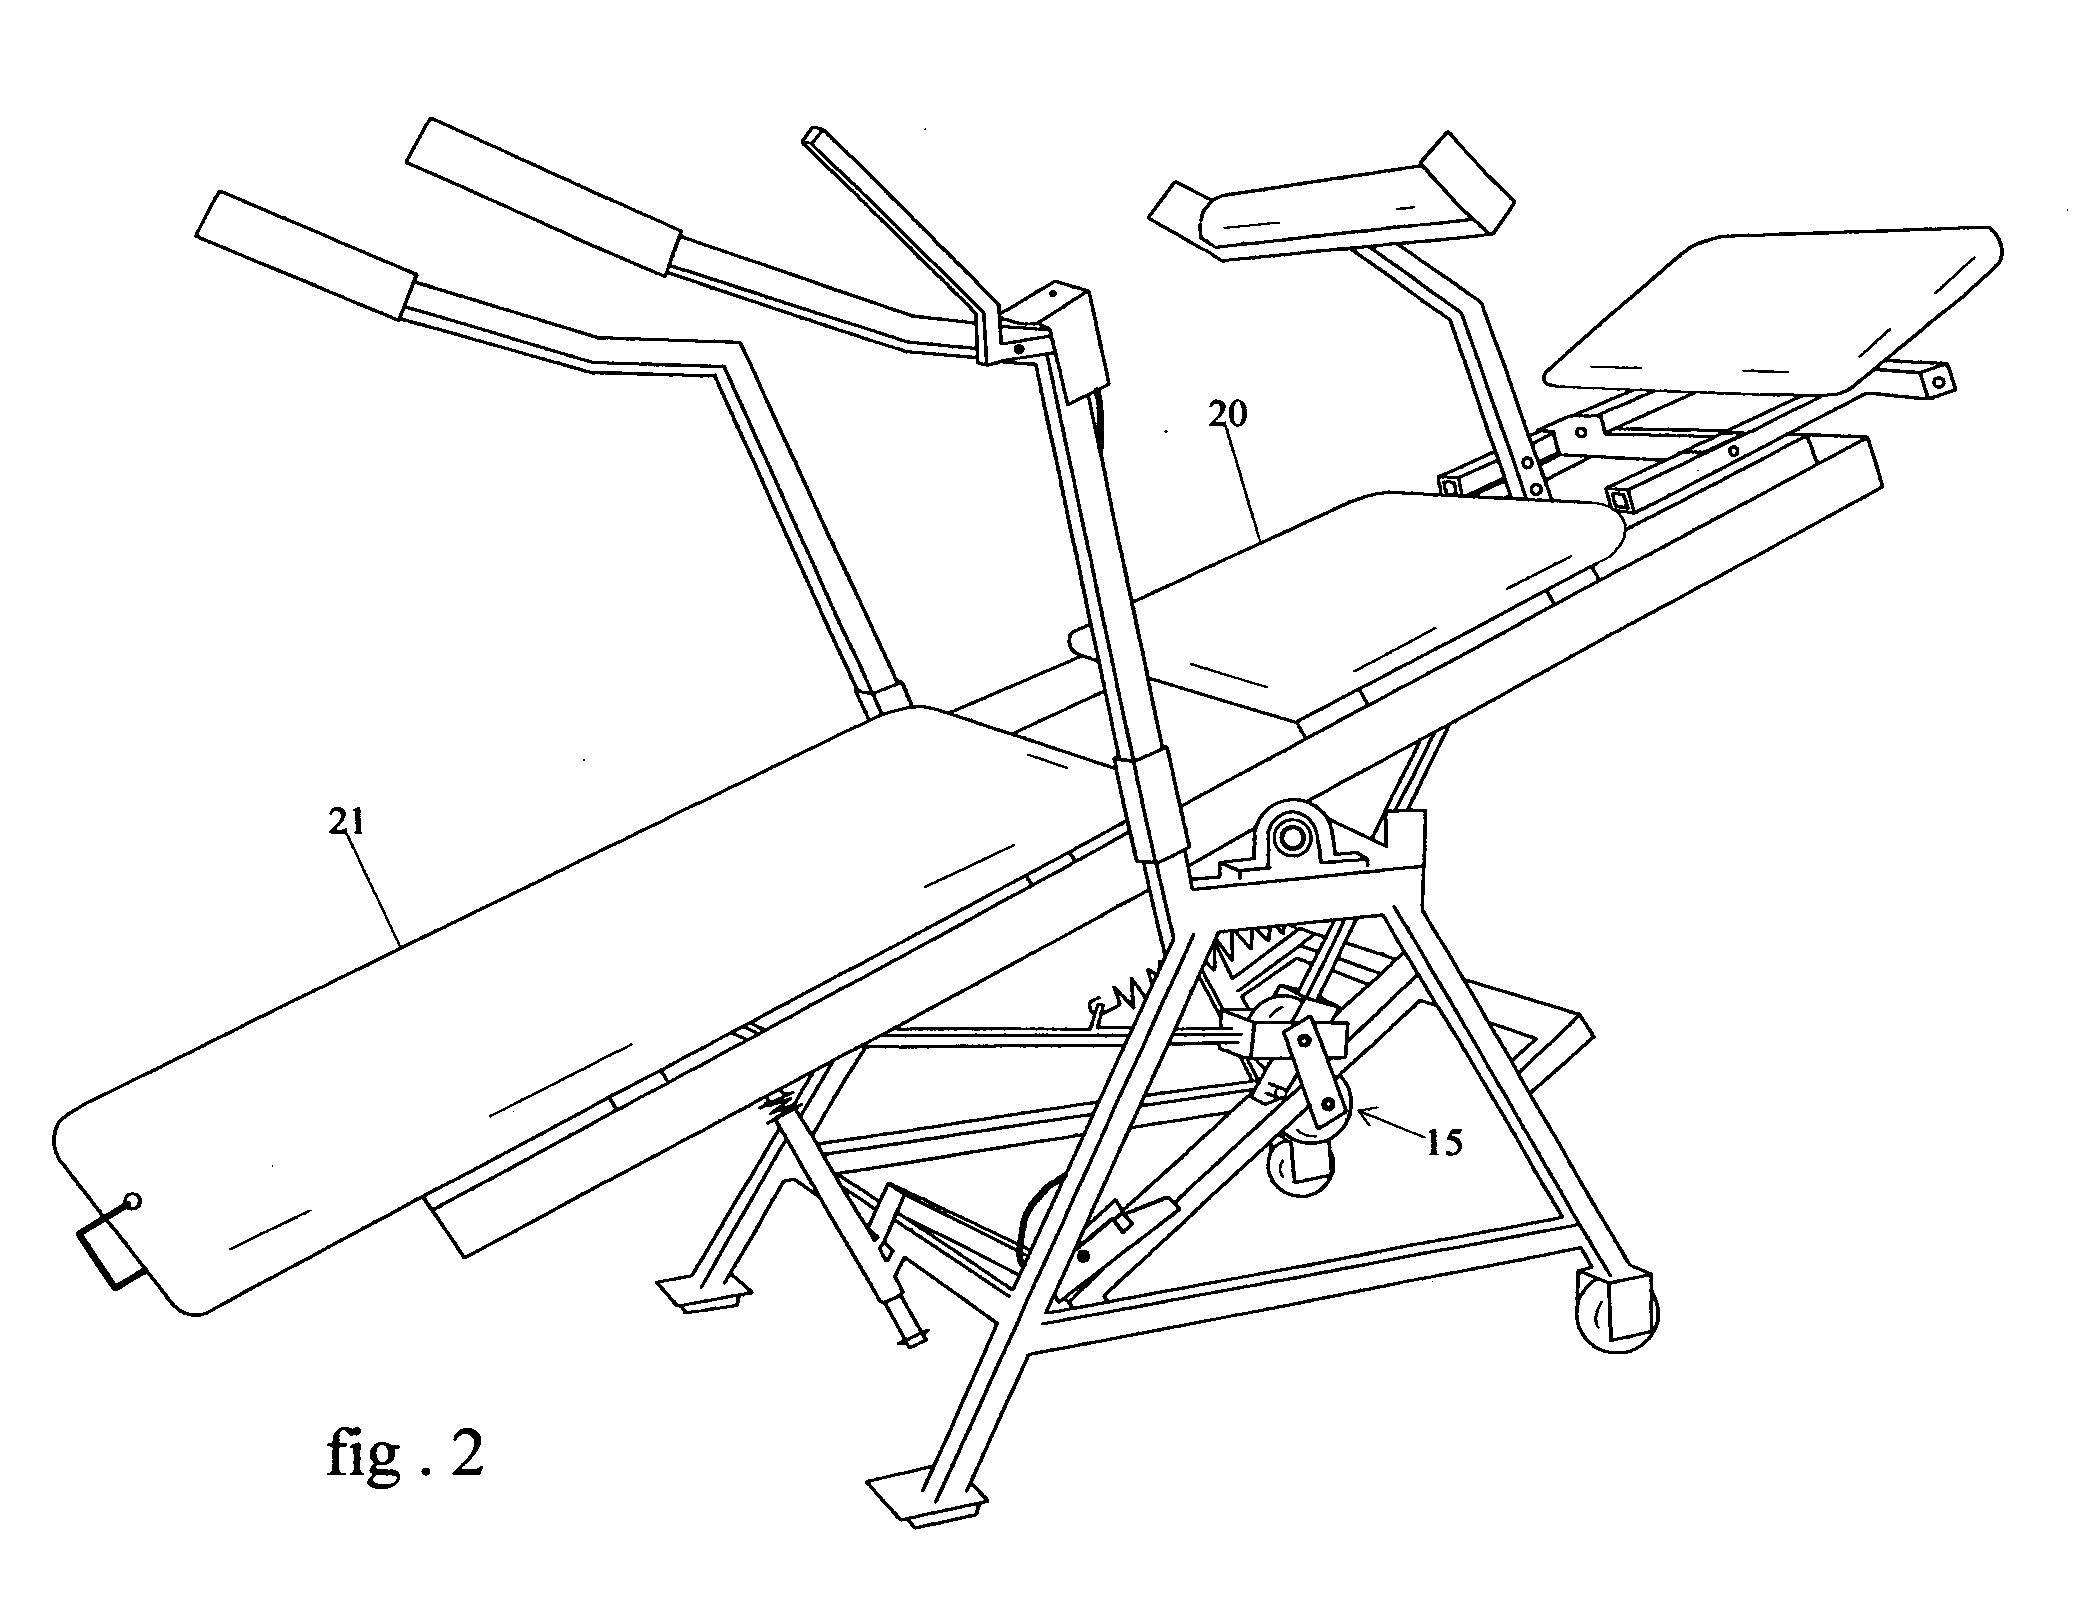 Therapeutic, tilting, split table, traction apparatus for home, office ,or workplace use, manually operated by the user / person, to relieve back pain and /or stretch, lumbar /spine / back muscles before and / or after athletic activity ,bending or lifting type work or sitting all day .Traction / distraction, may be applied, intermittently, using an on-off cycle, or continuously.